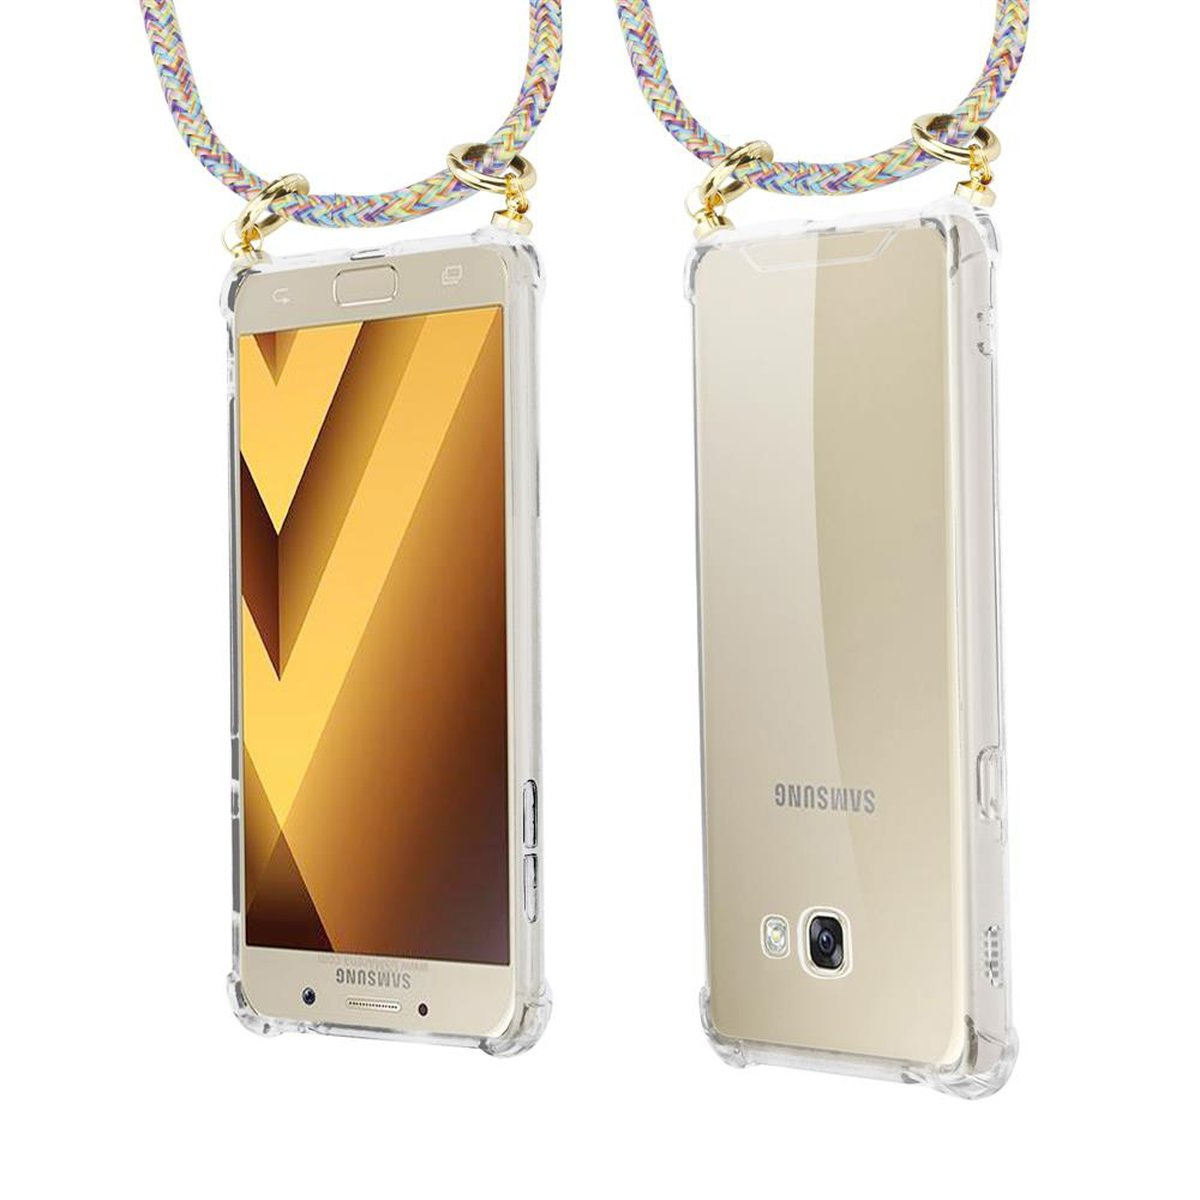 CADORABO Handy Ringen, Kette abnehmbarer mit RAINBOW Hülle, 2017, Backcover, und A5 Kordel Gold Samsung, Galaxy Band